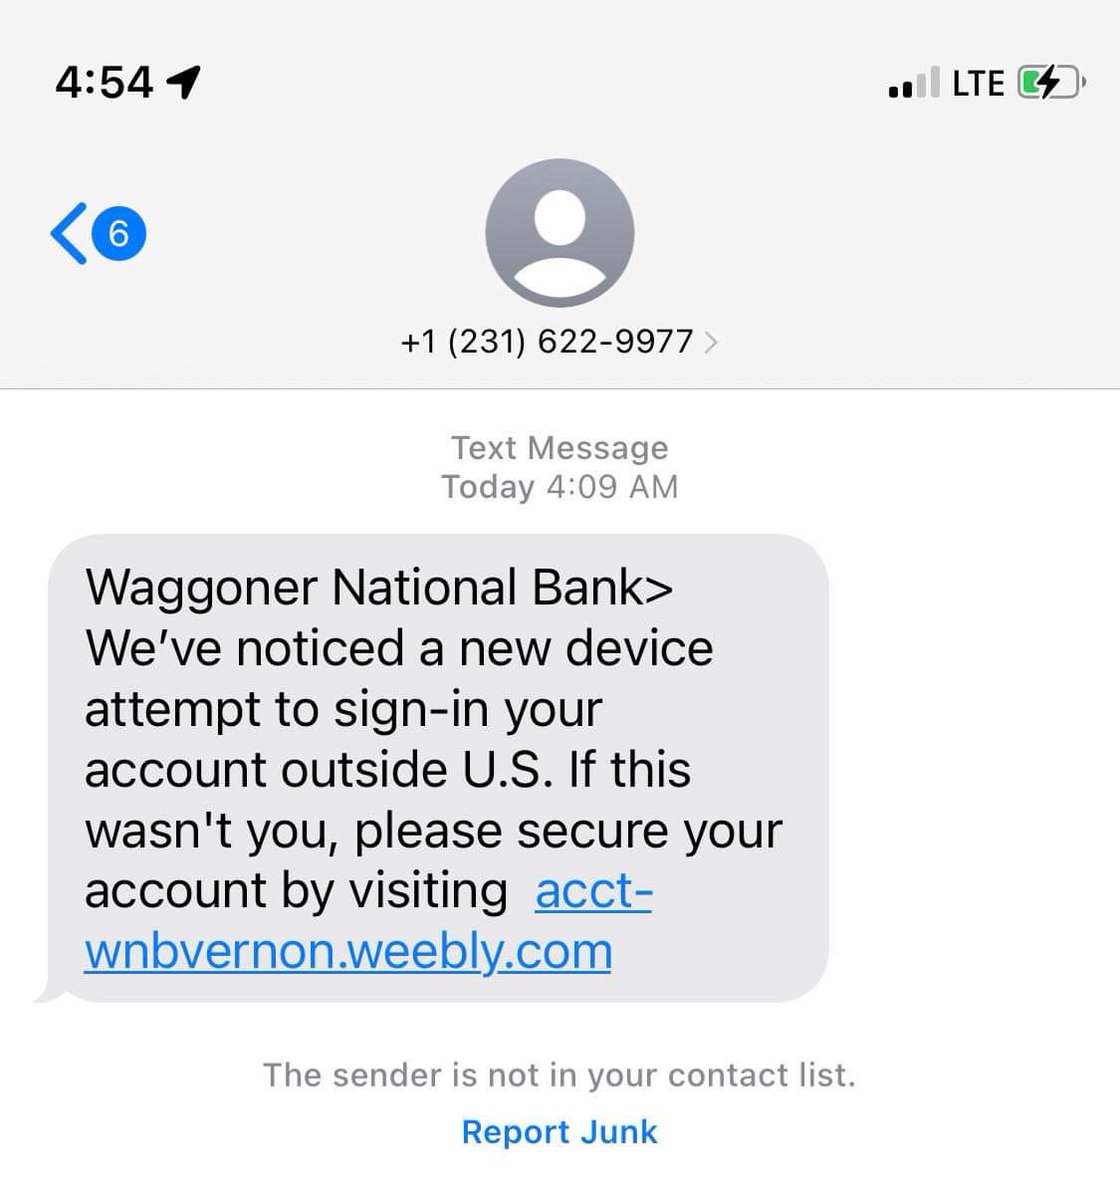 ATTENTION WNB CUSTOMERS: BEWARE OF THIS SCAM!!!! We have been made aware of a SCAM text going around posing as the WNB. THIS IS NOT THE WNB, PLEASE DO NOT FOLLOW THE LINK IF YOU RECEIVED A MESSAGE LIKE THIS. Vernon- 940-552-2511 Electra- 940-495-3100